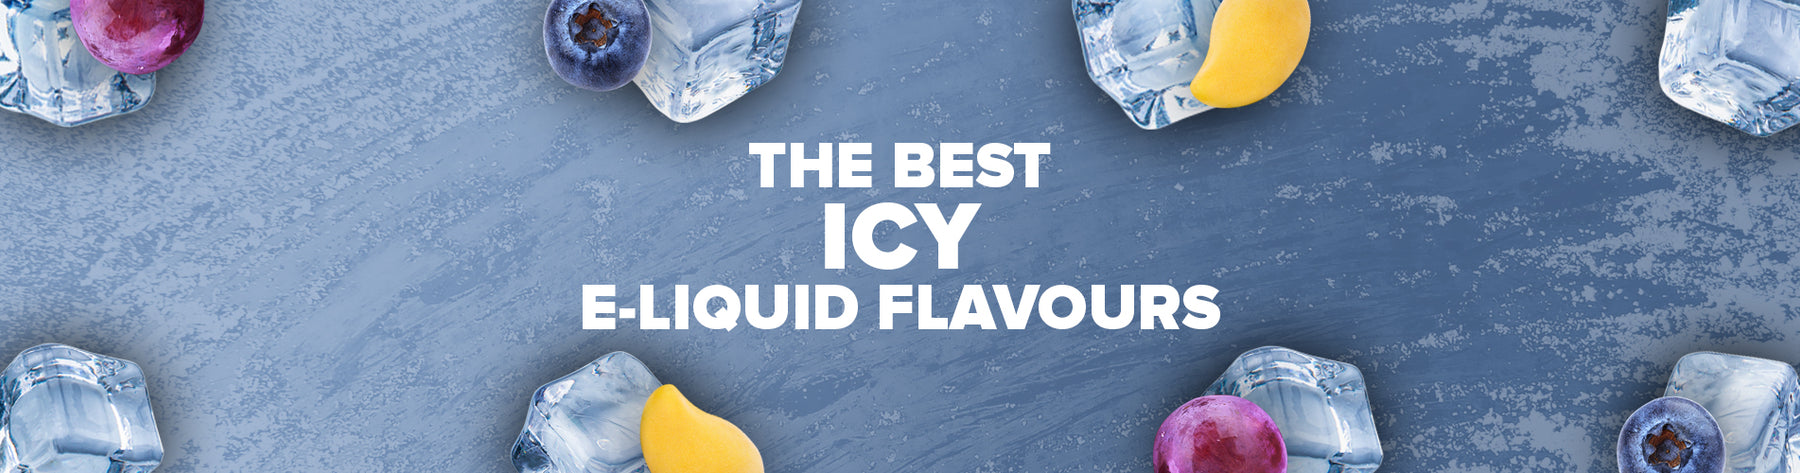 The Best Icy E-Liquid Flavours